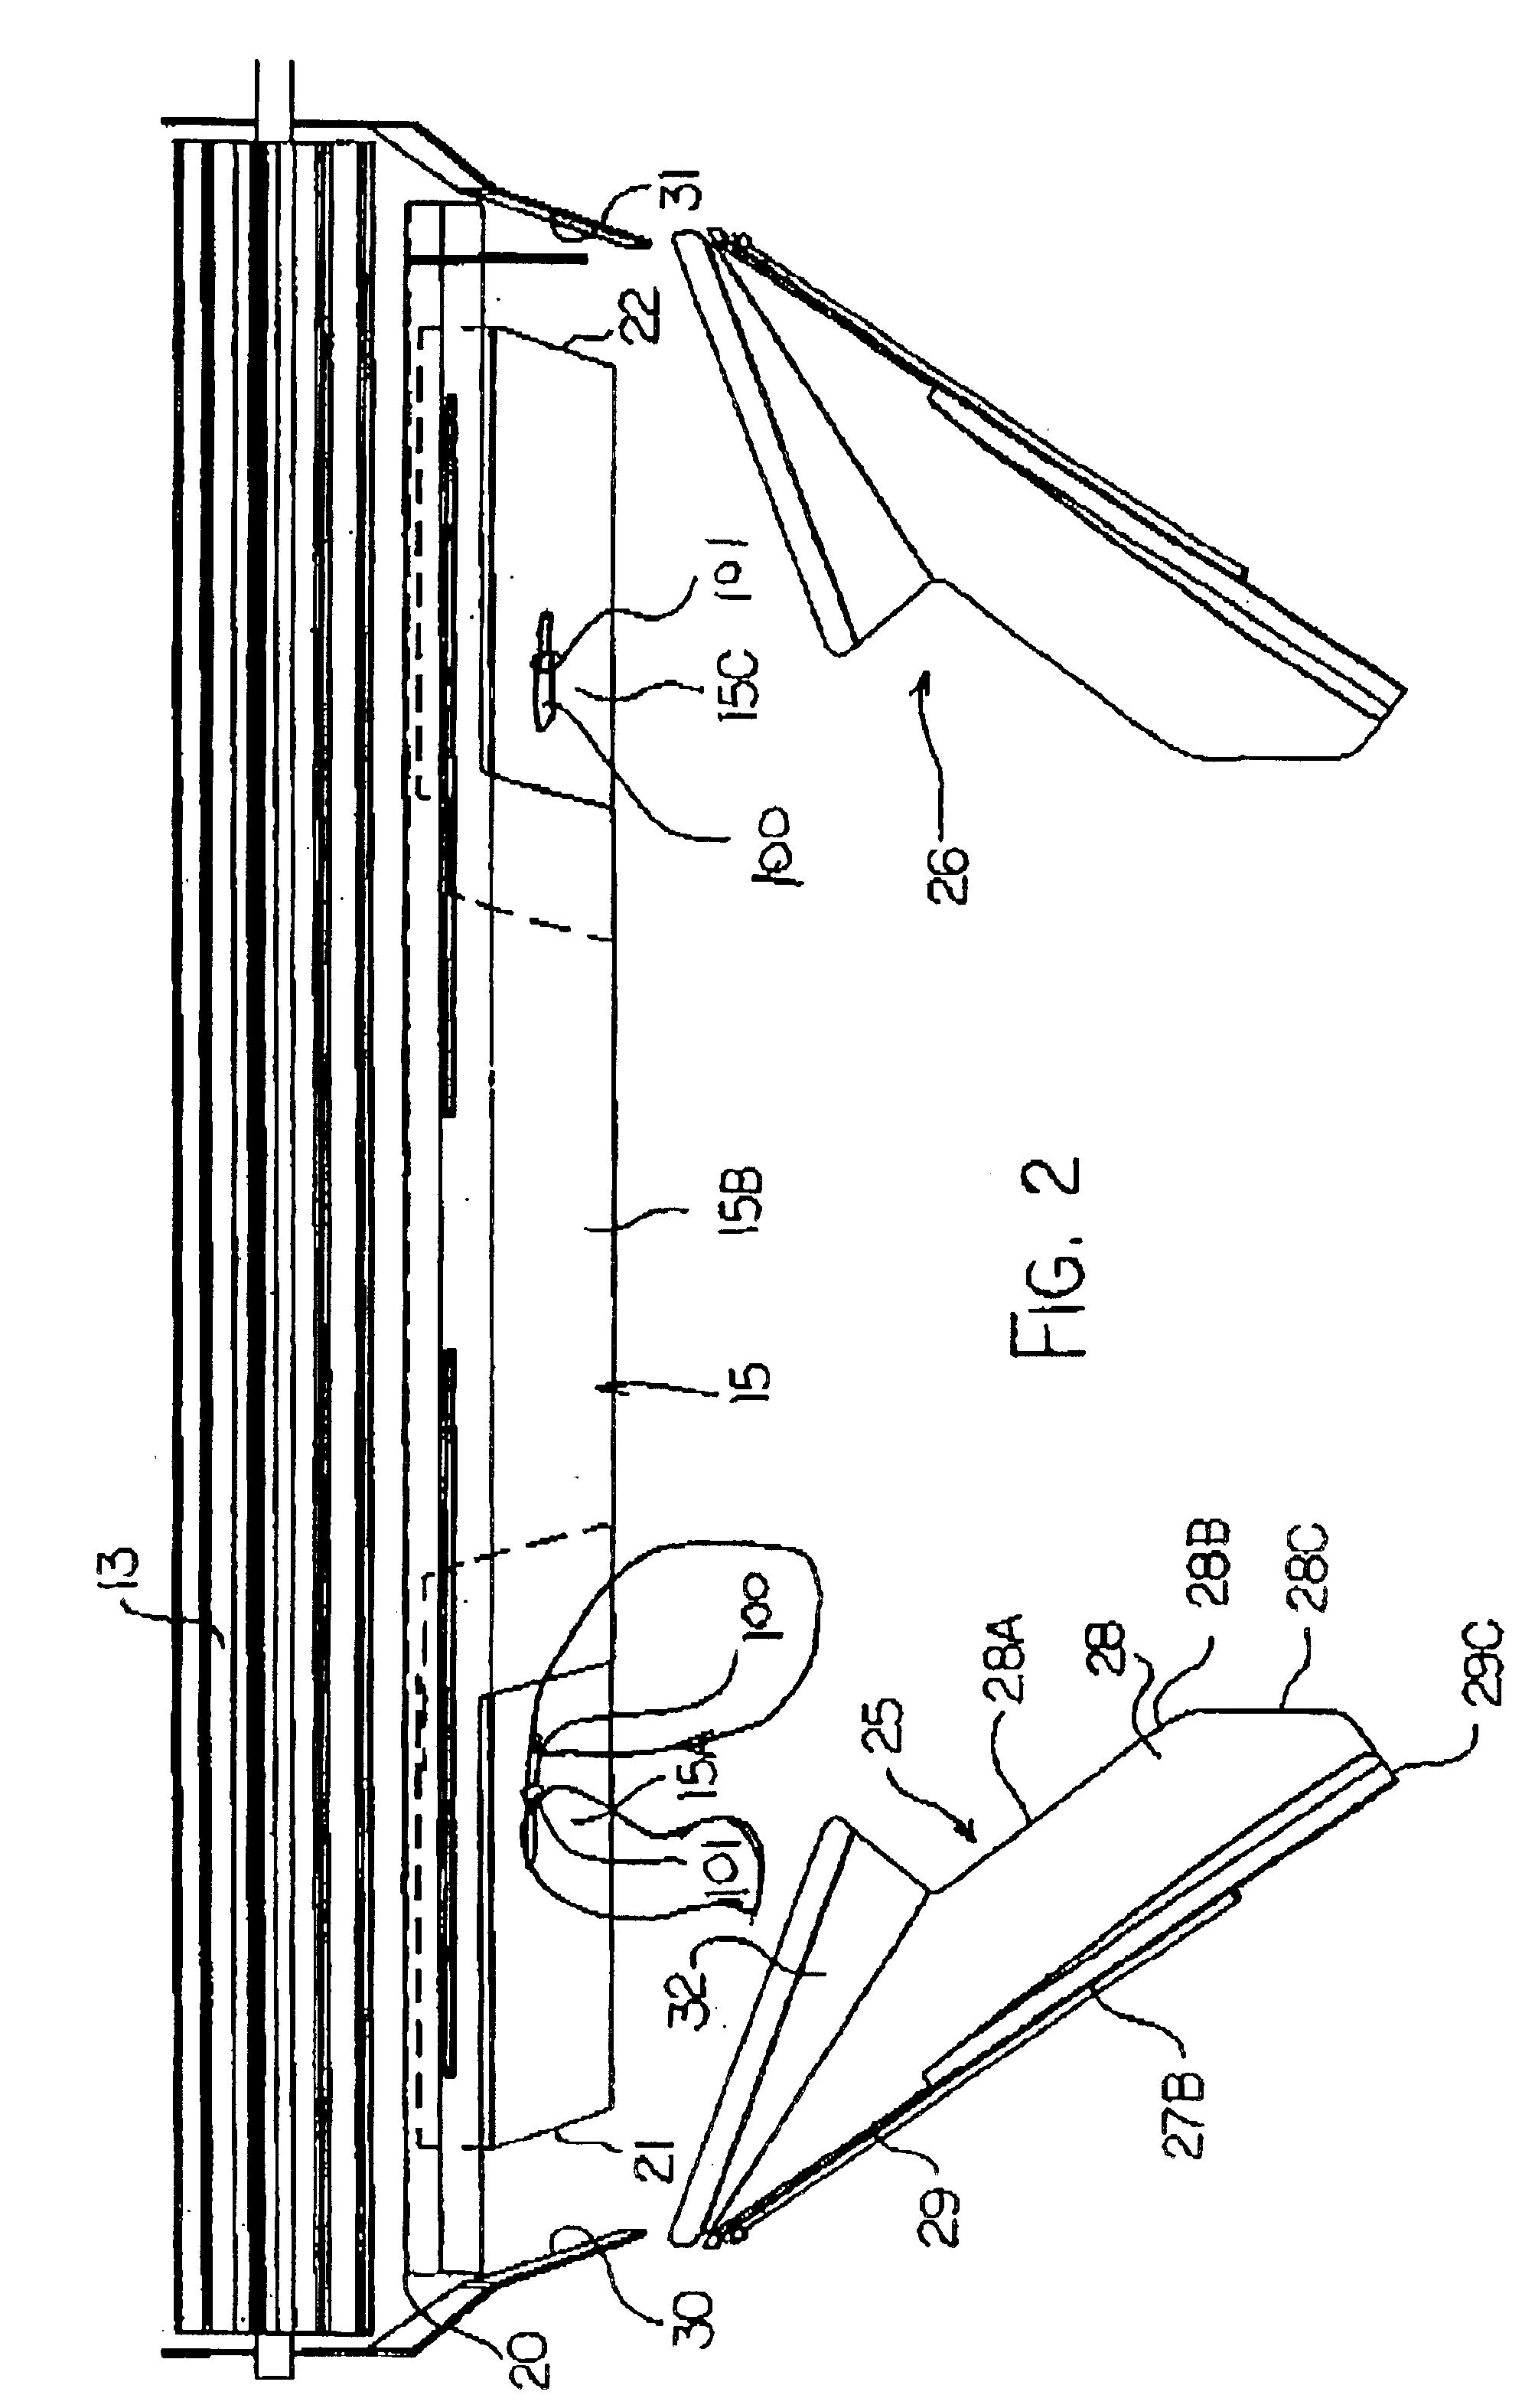 Windrow forming system for a crop harvesting header